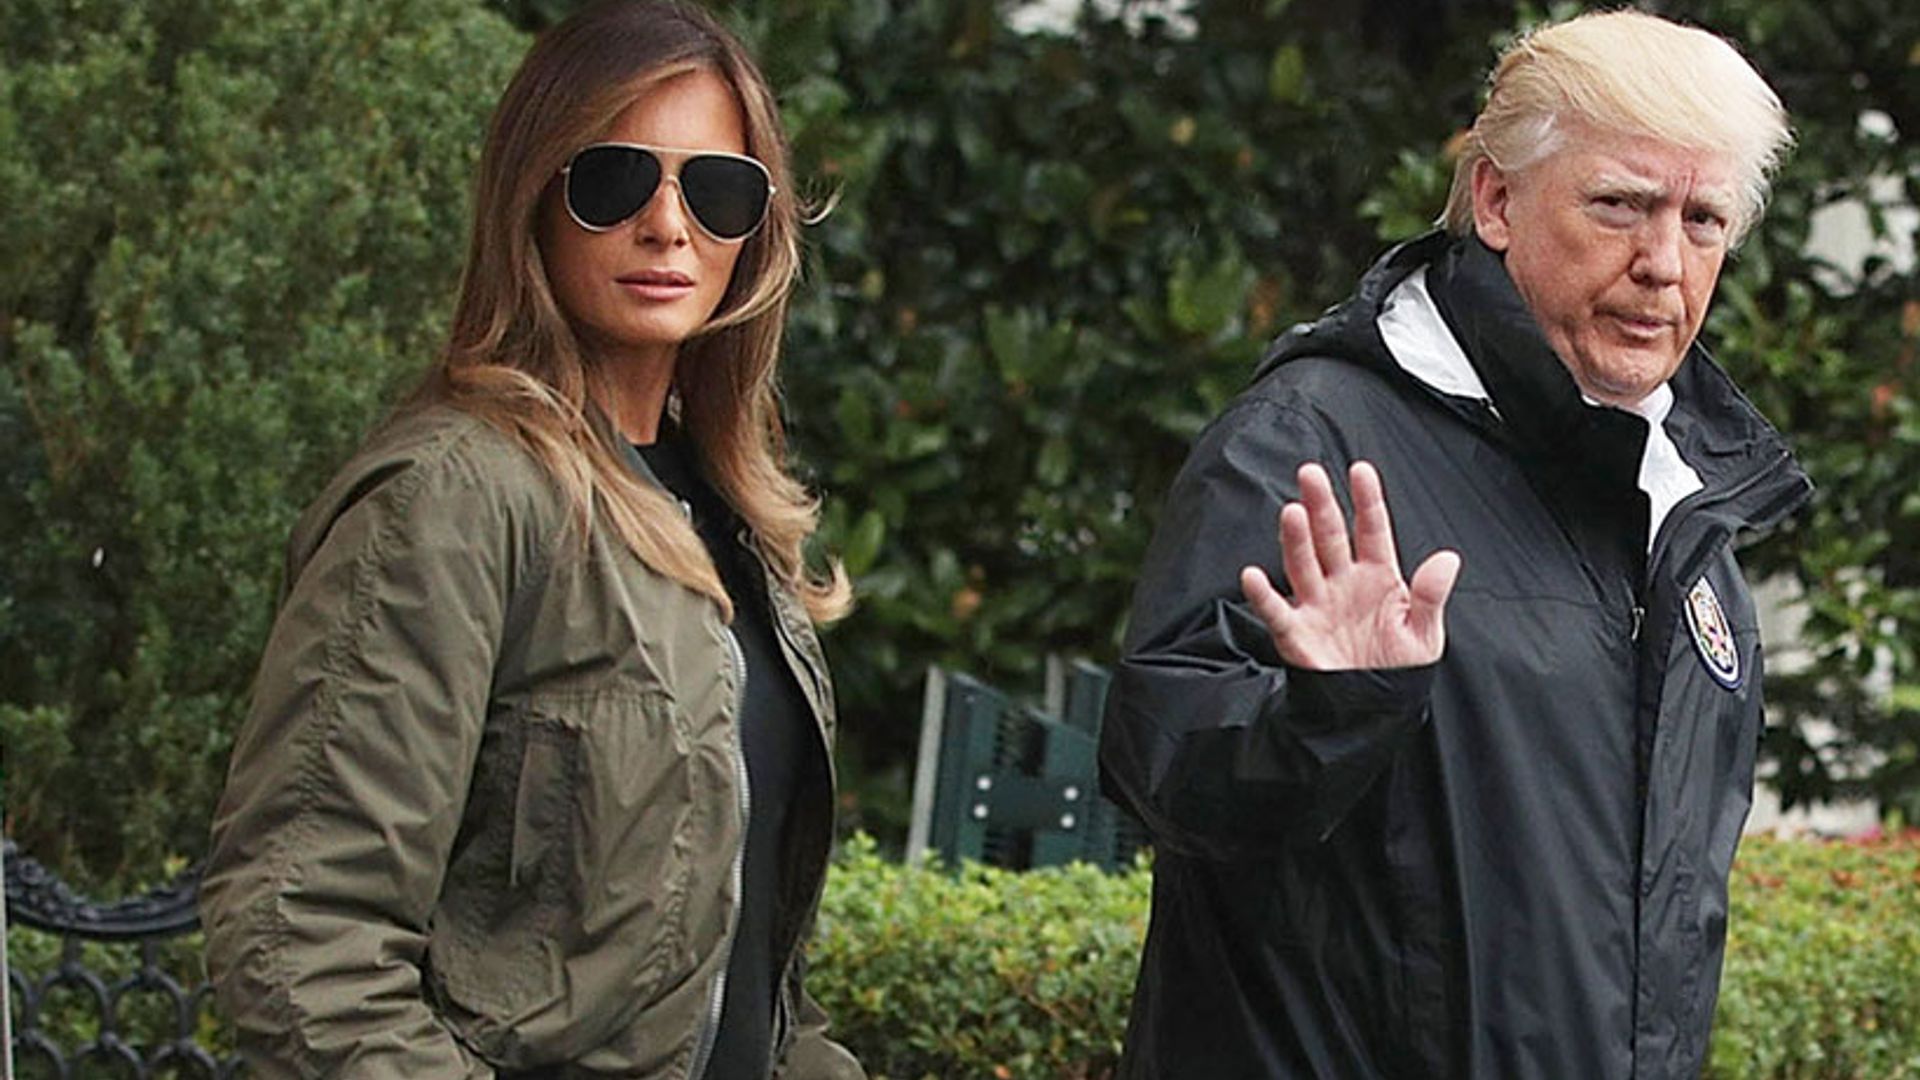 Melania Trump's hat makes a statement as she and Donald touch down in Texas